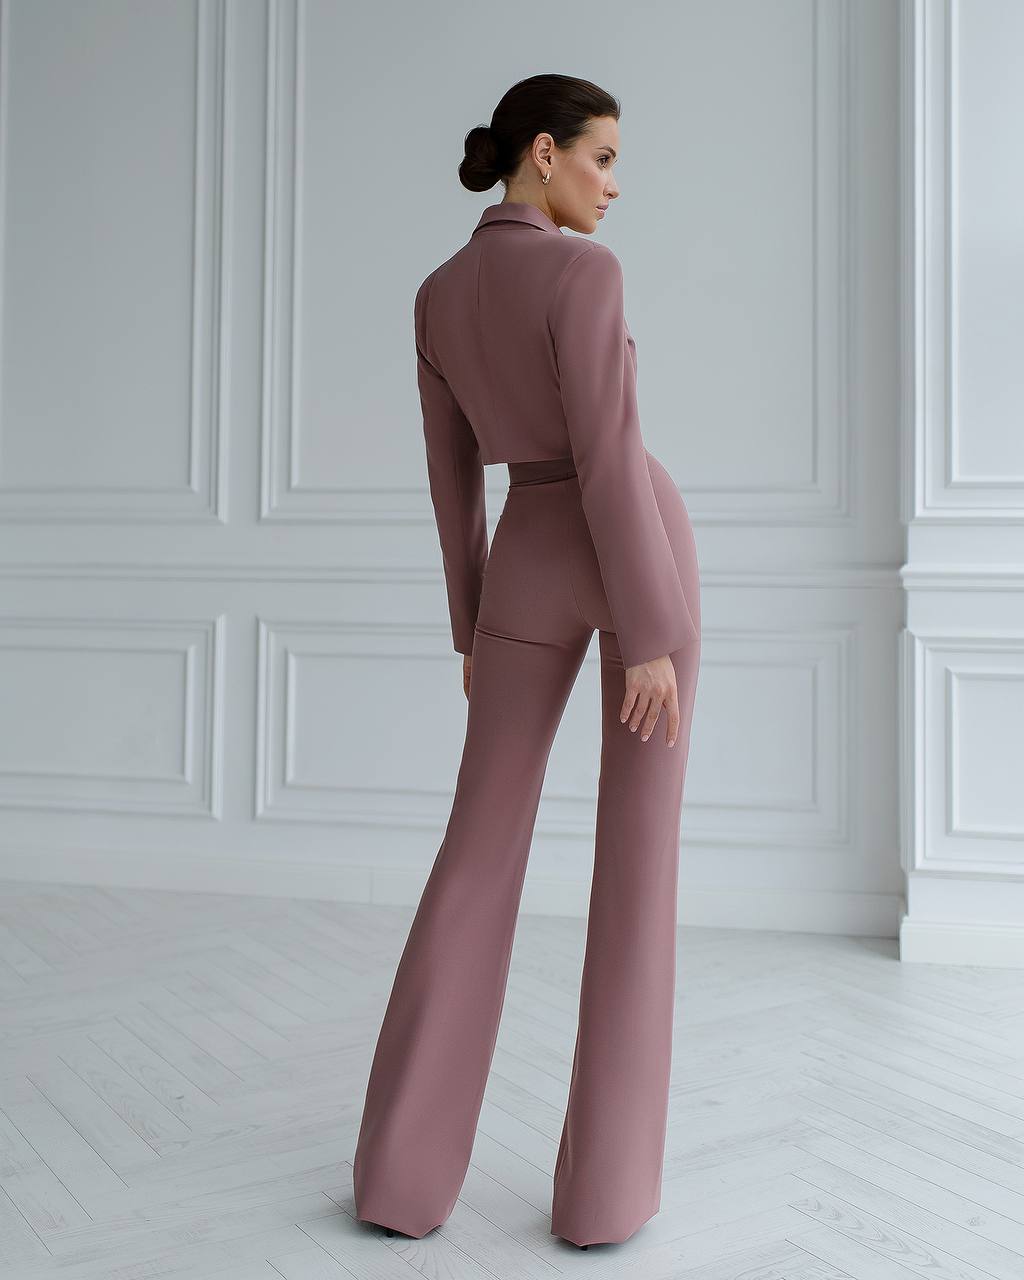 a woman wearing a pink suit and high heels